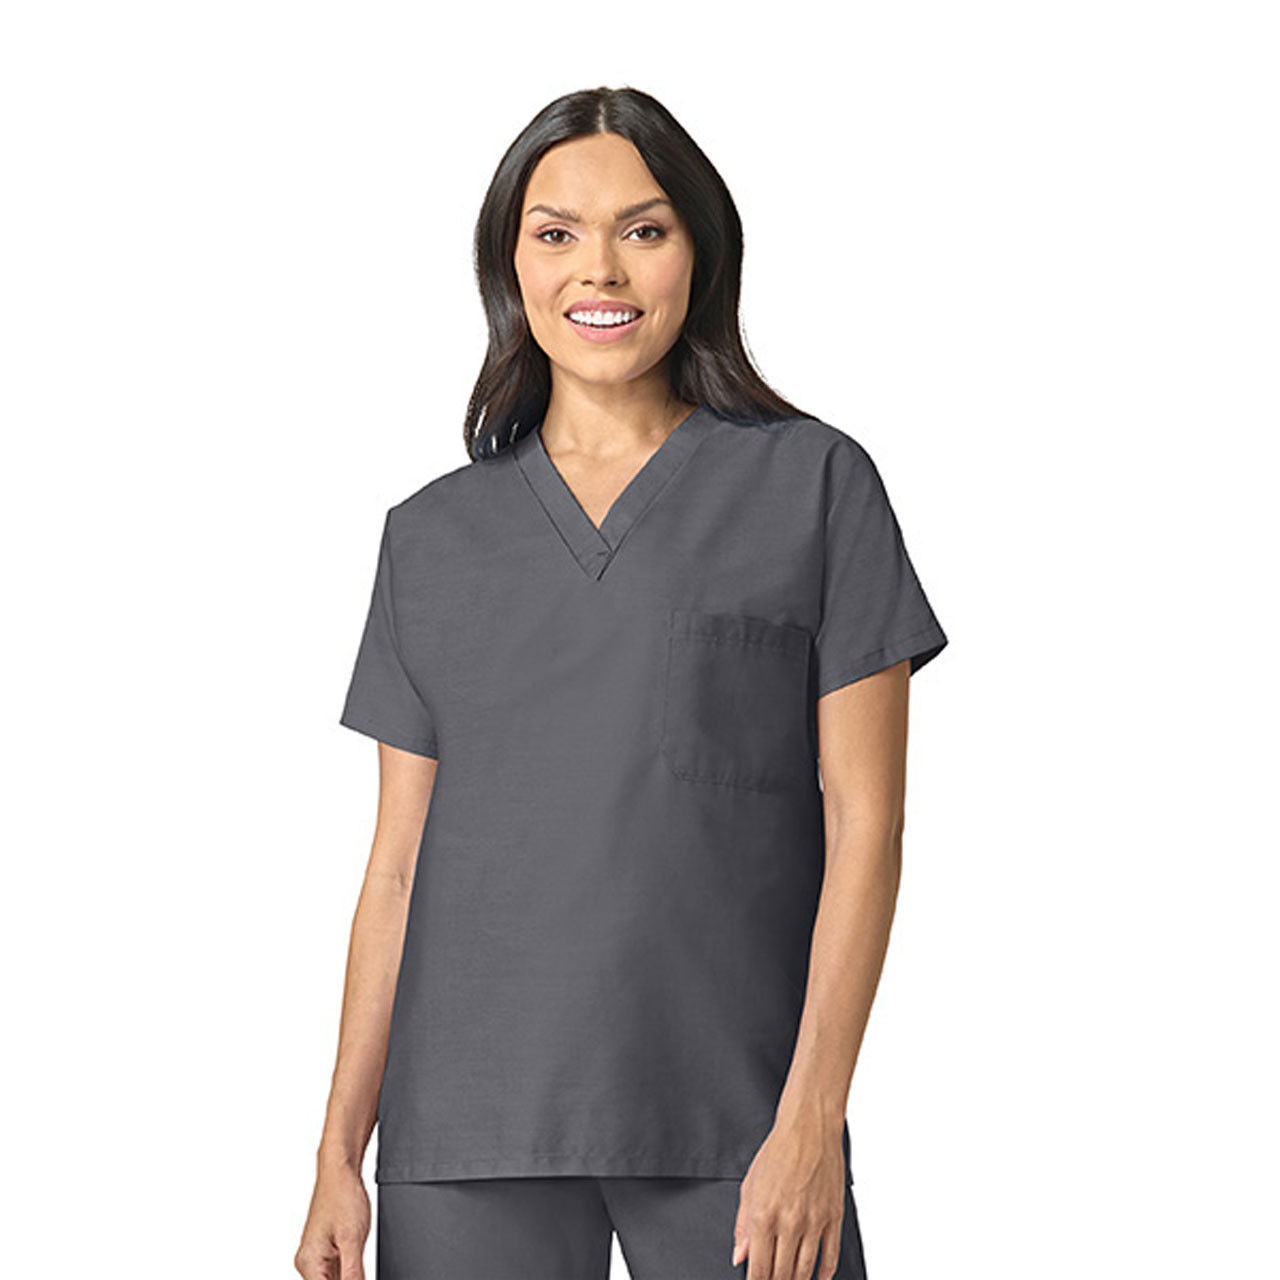 Does the Pewter Gray Scrub Top have any pockets?